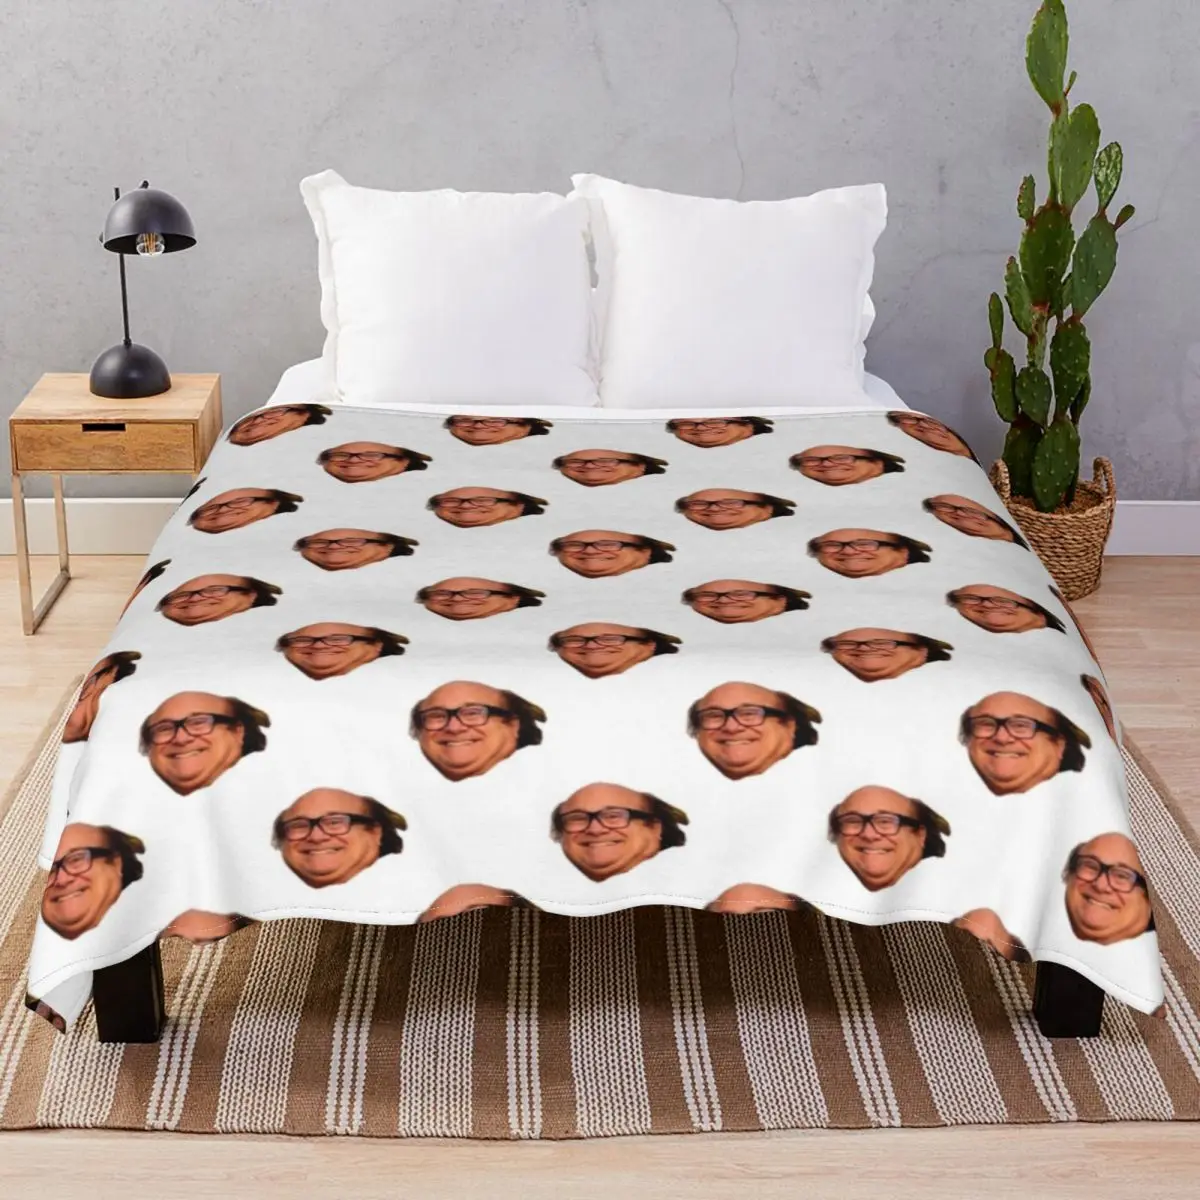 Danny Devito Blankets Flannel Plush Decoration Soft Throw Blanket for Bedding Home Couch Travel Cinema